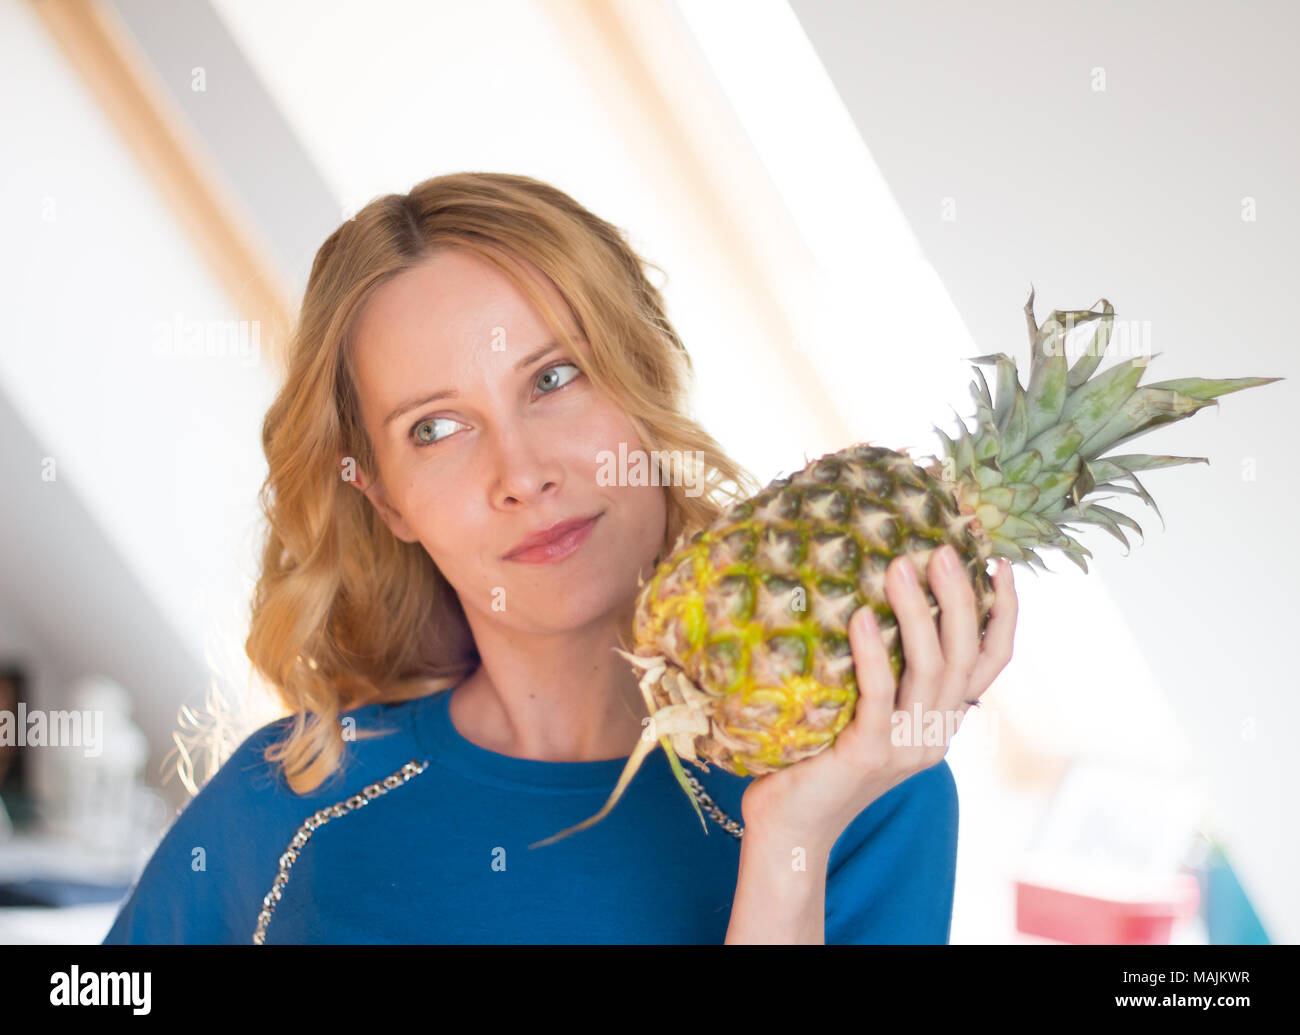 Woman holding pineapple Banque D'Images